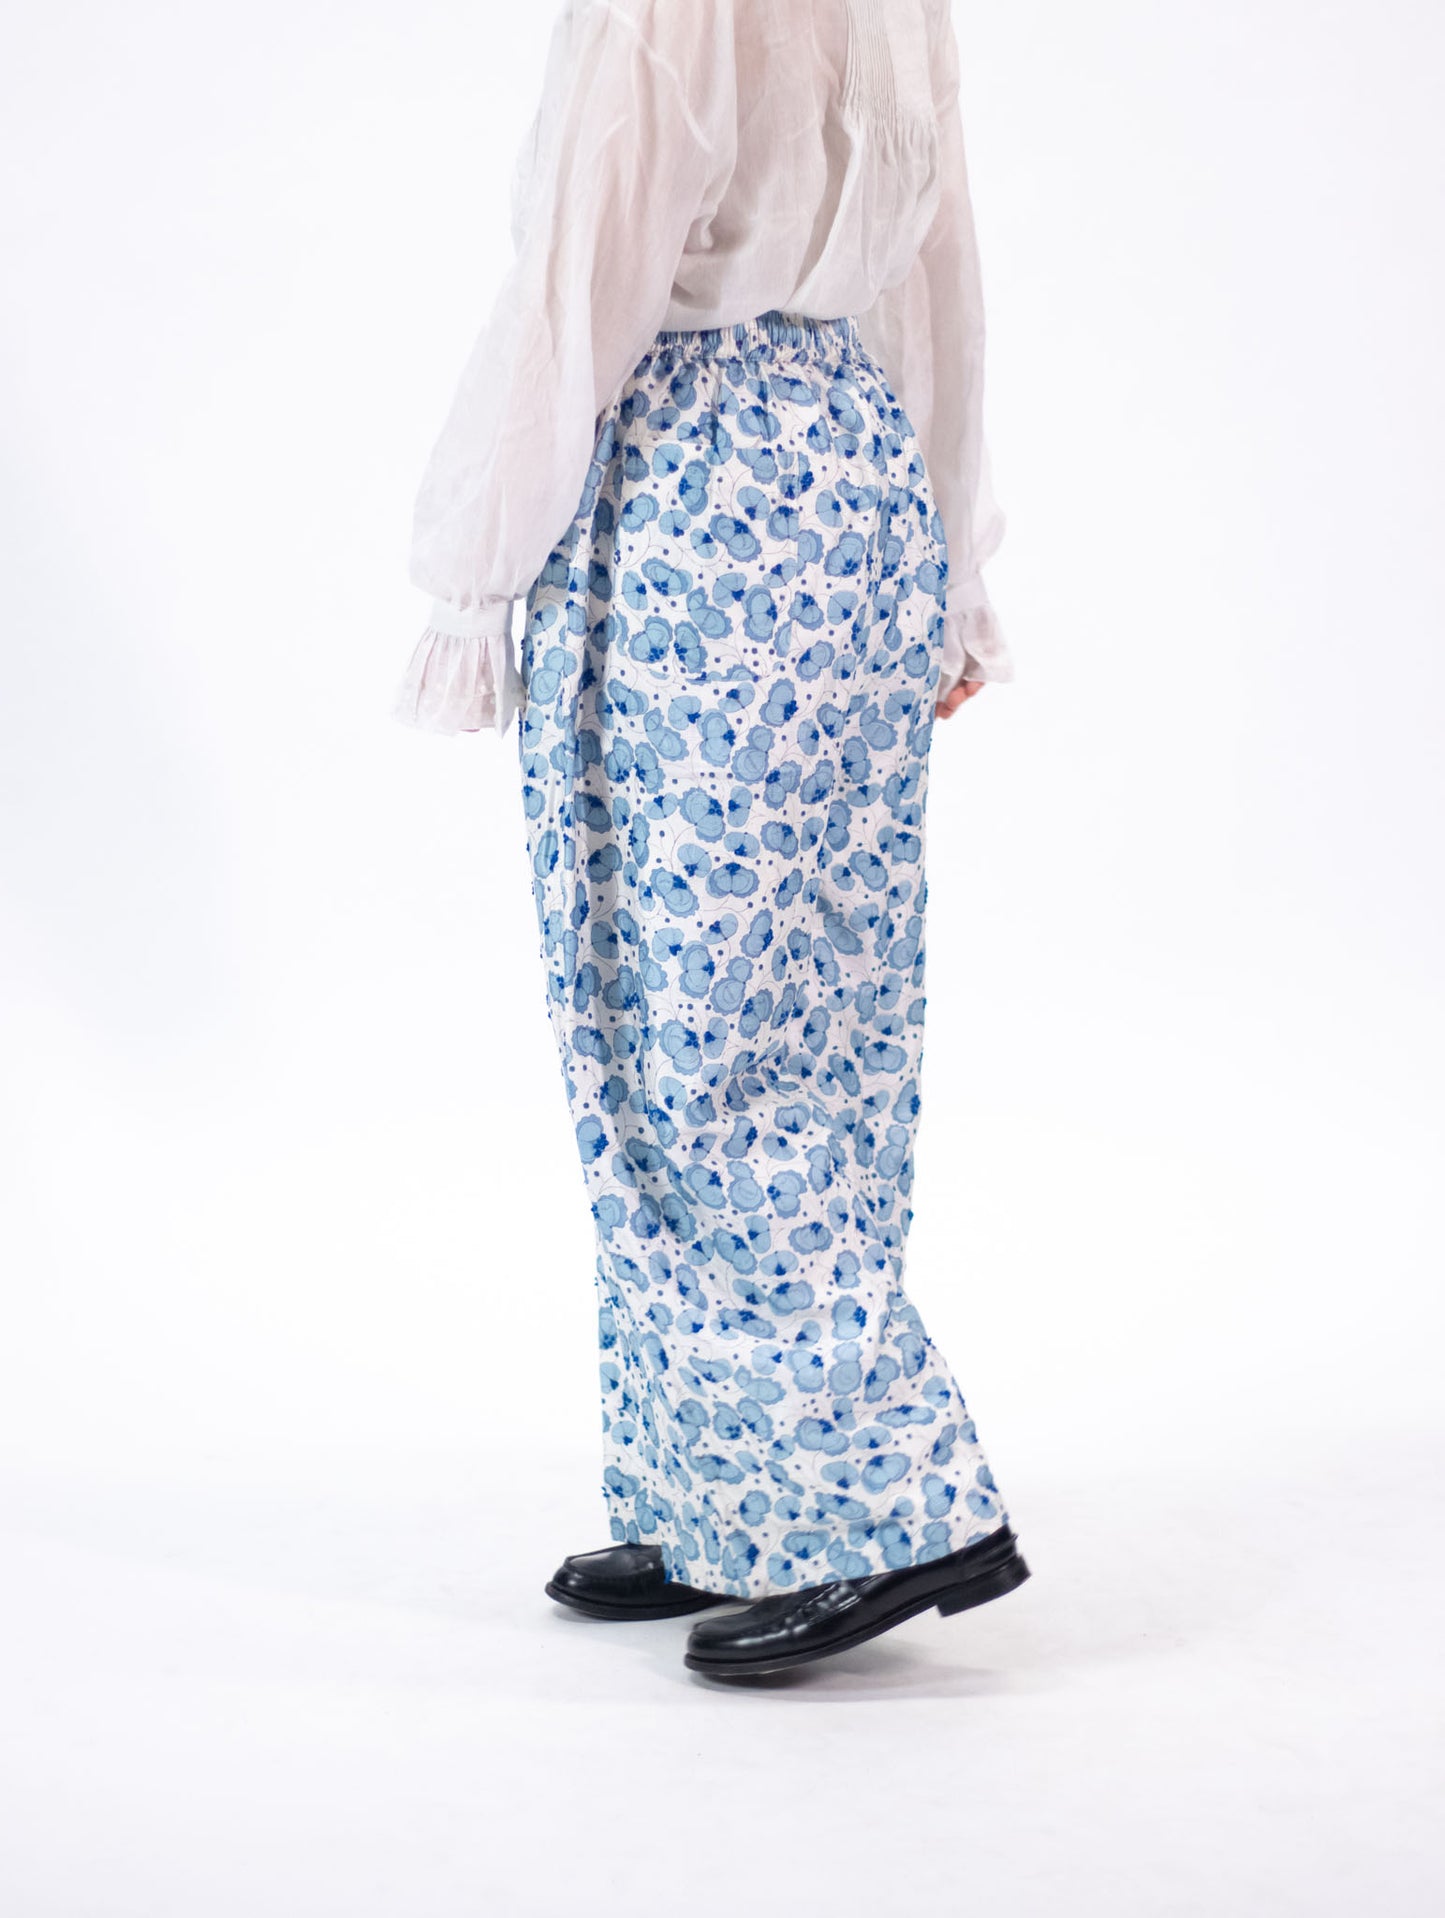 [50% off] Bunon Embroidery Pants - White x Blue